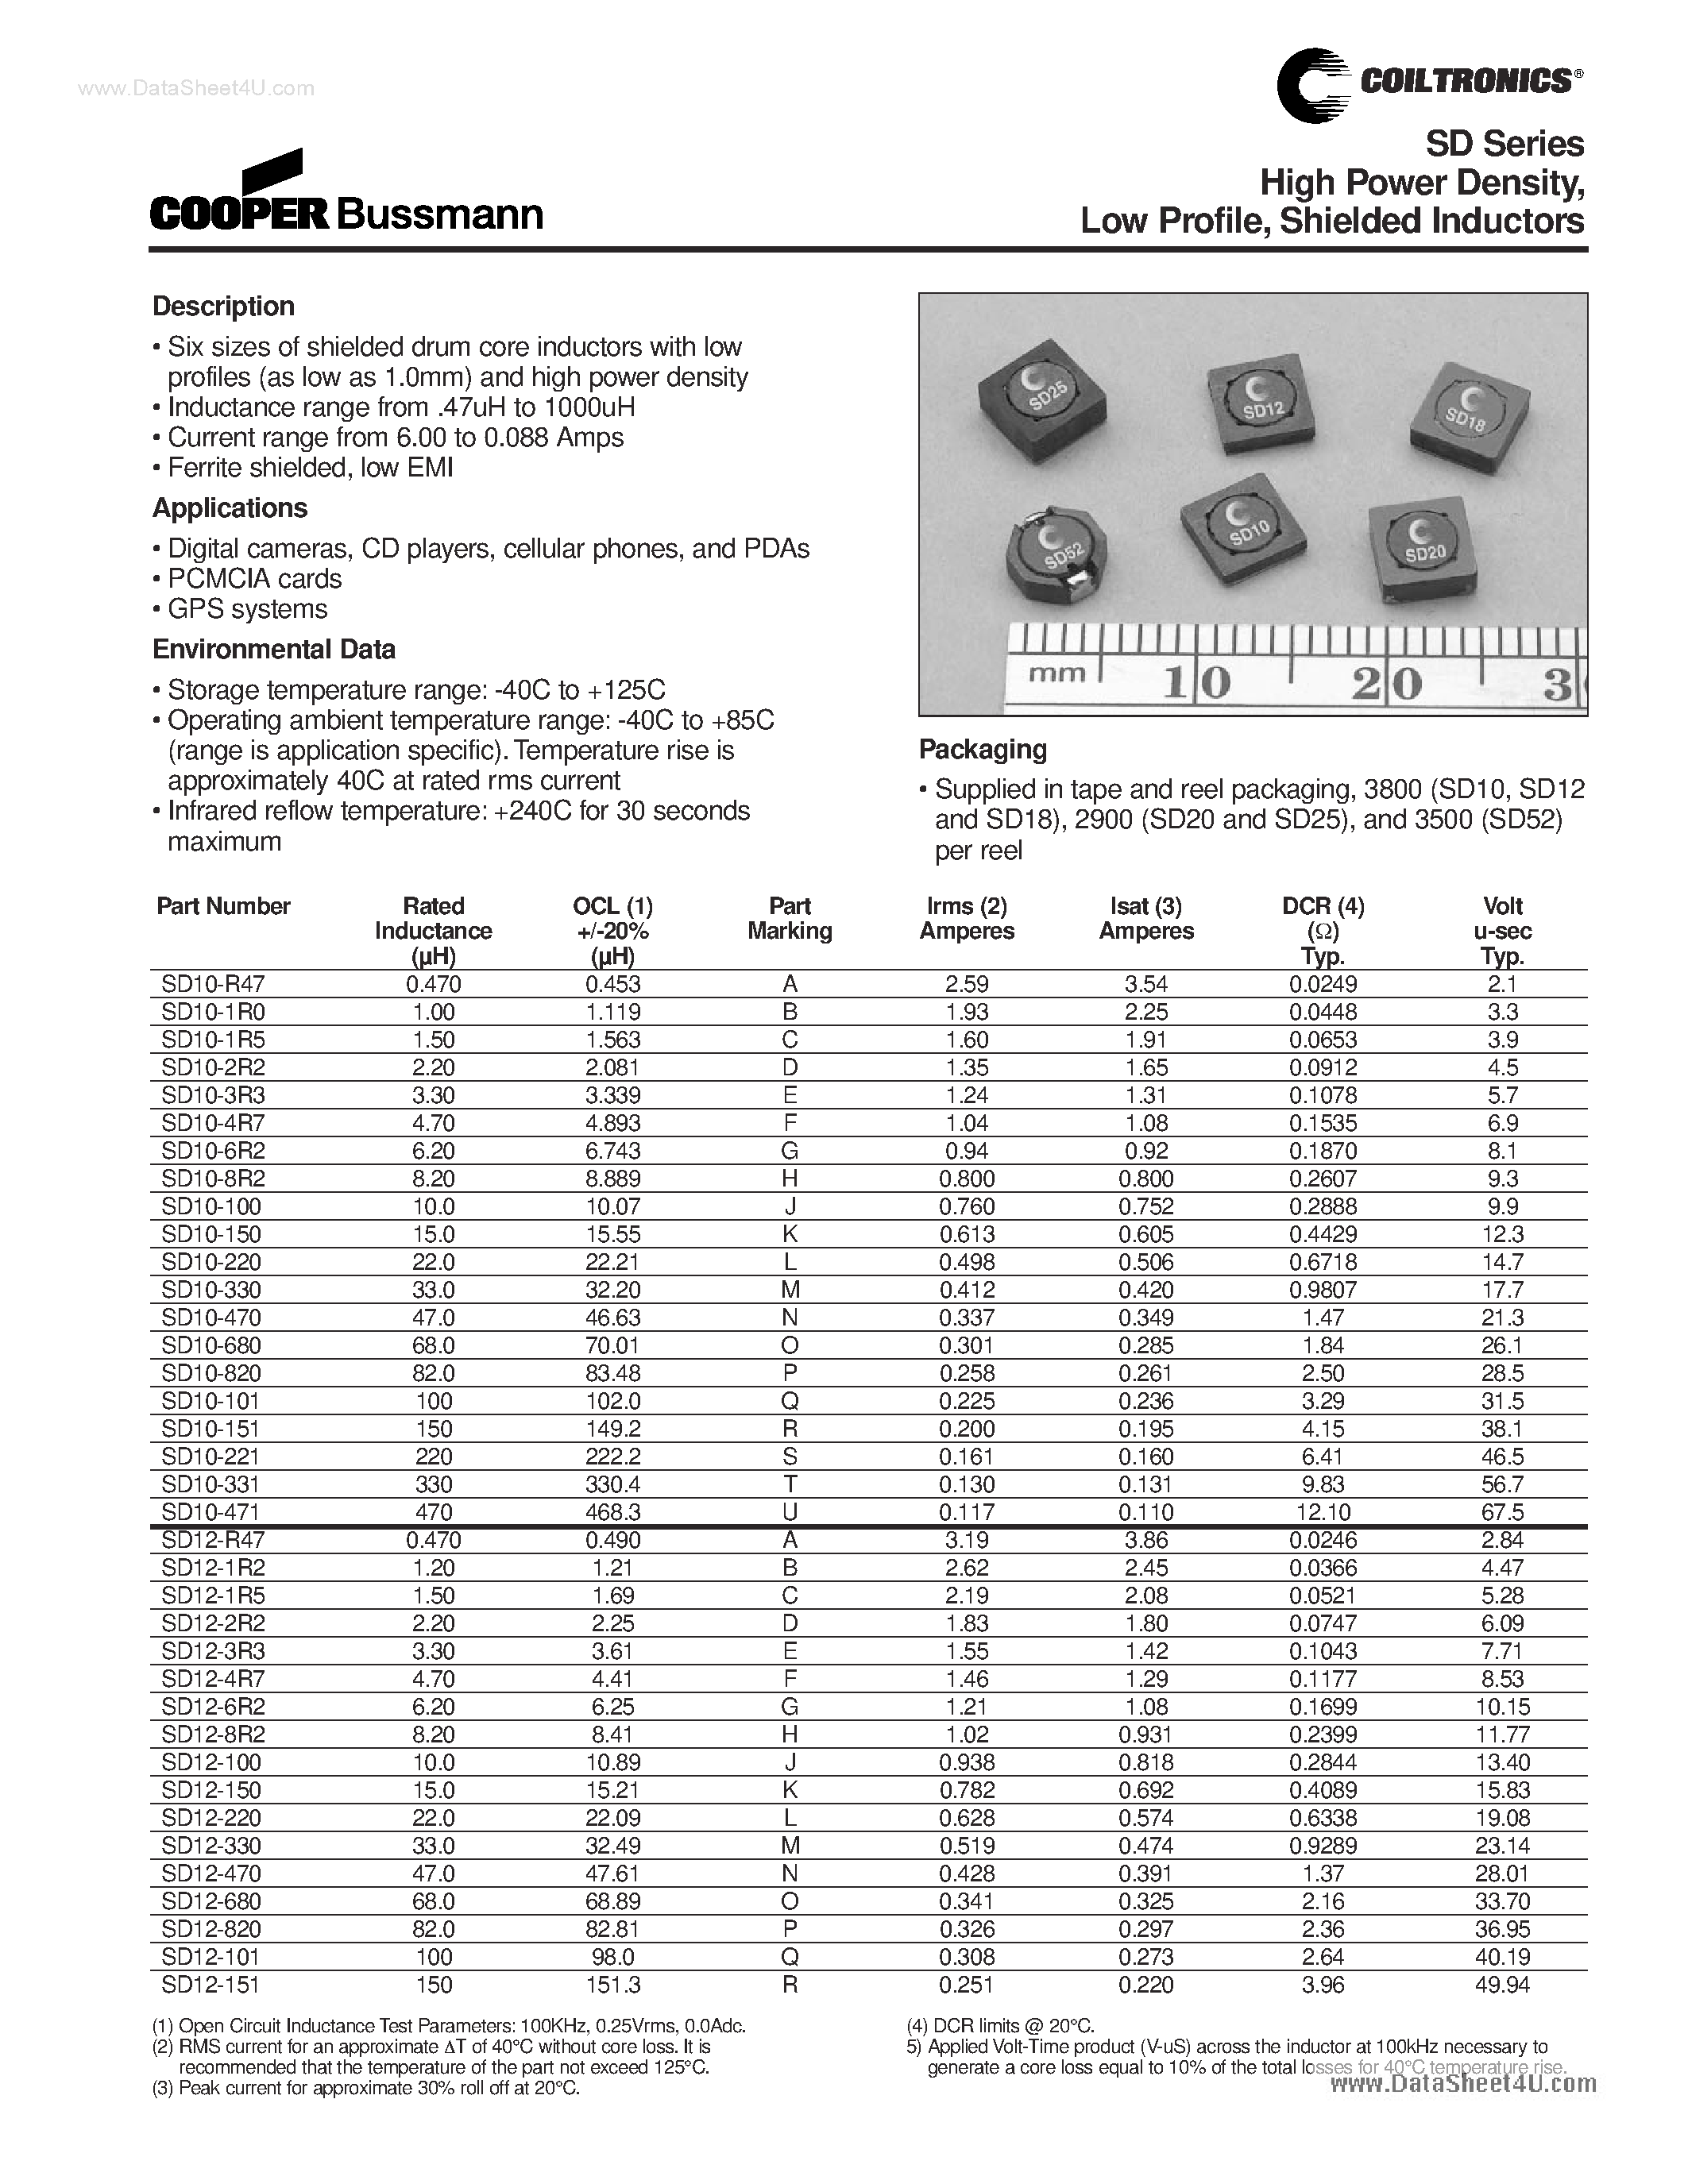 Datasheet SD10-xxx - (SD Series) High Power Density / Low Profile / Shielded Inductors page 1